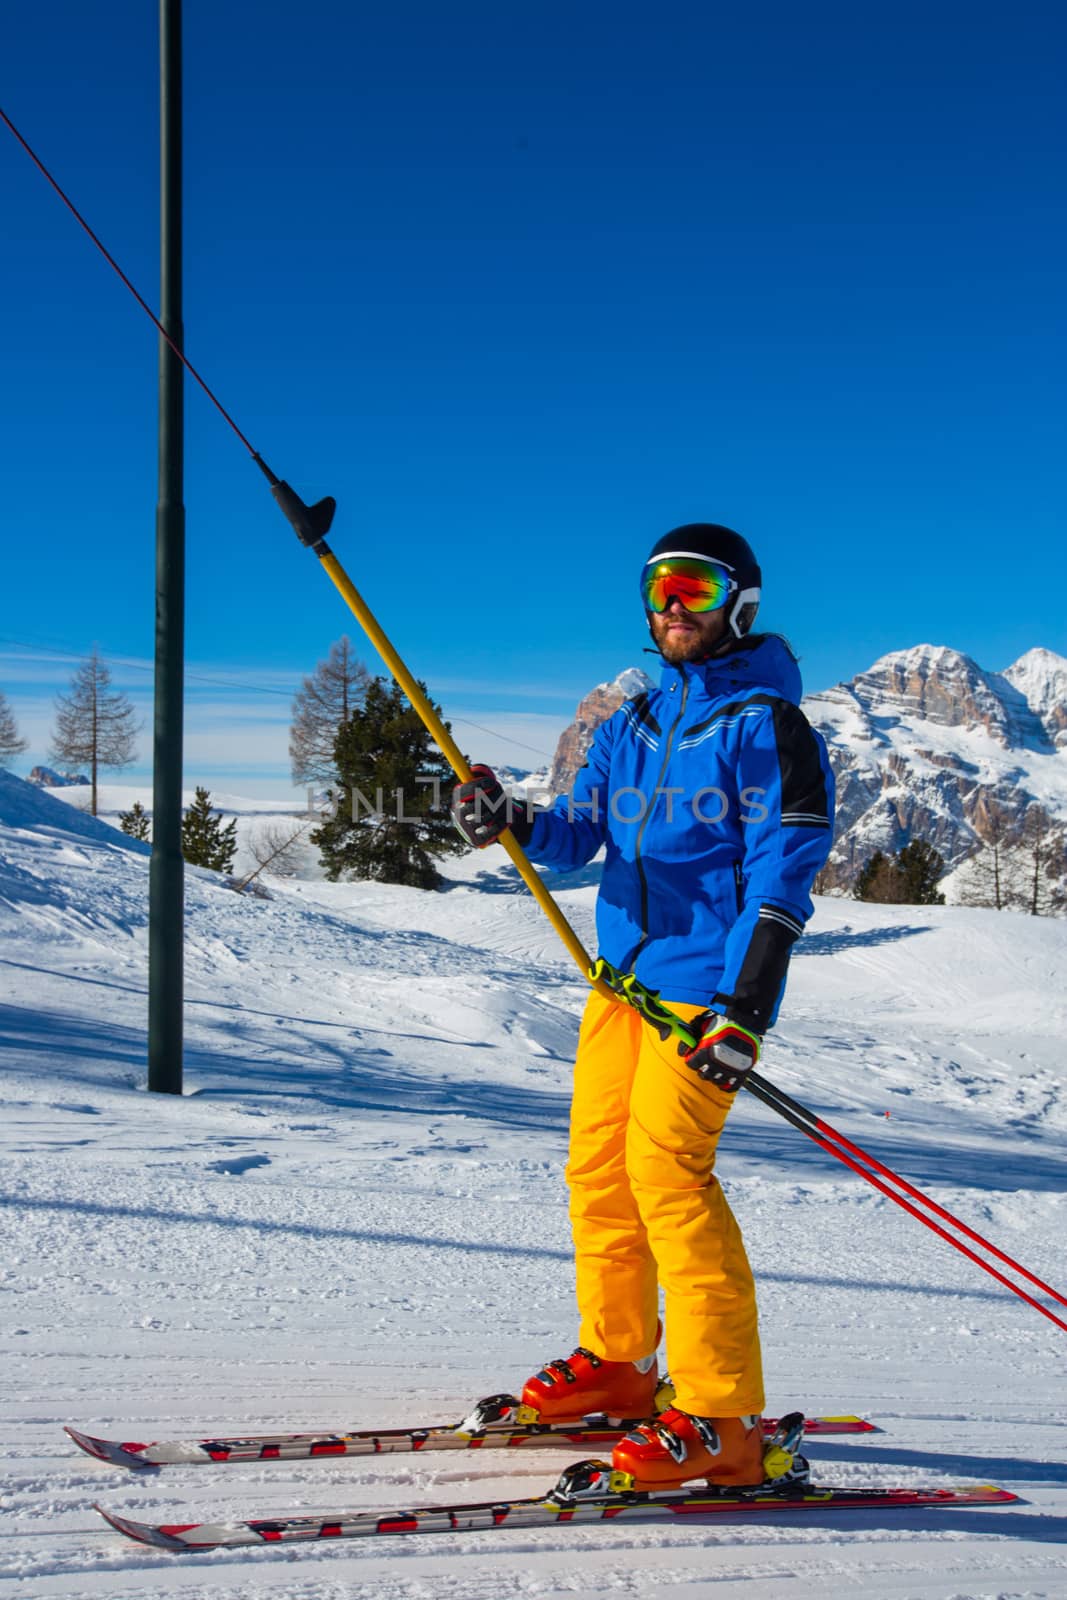 Alpine skier with T-bar lift, blue and yellow clothes on slope with mountains in the background at Cortina d'Ampezzo Faloria skiing resort area Dolomiti Italy